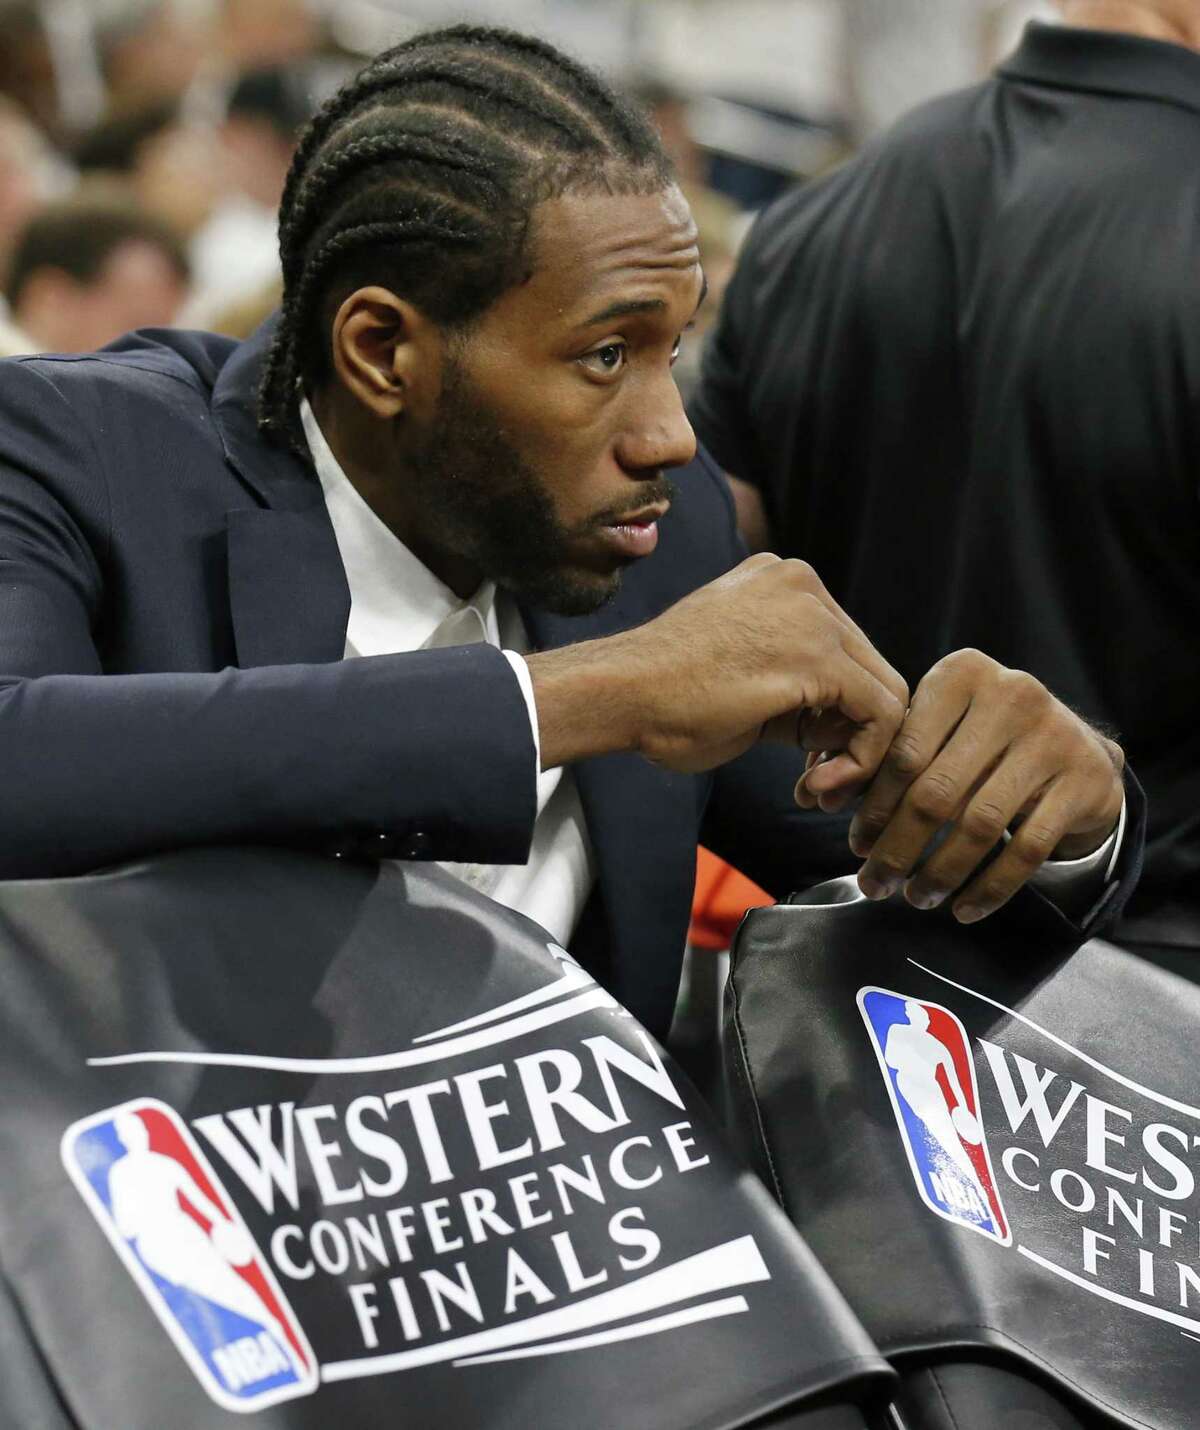 Kawhi Leonard, who was held out of Game 3 on Saturday, sits behind the bench and watches. Leonard has been out since the second half of Game 1.